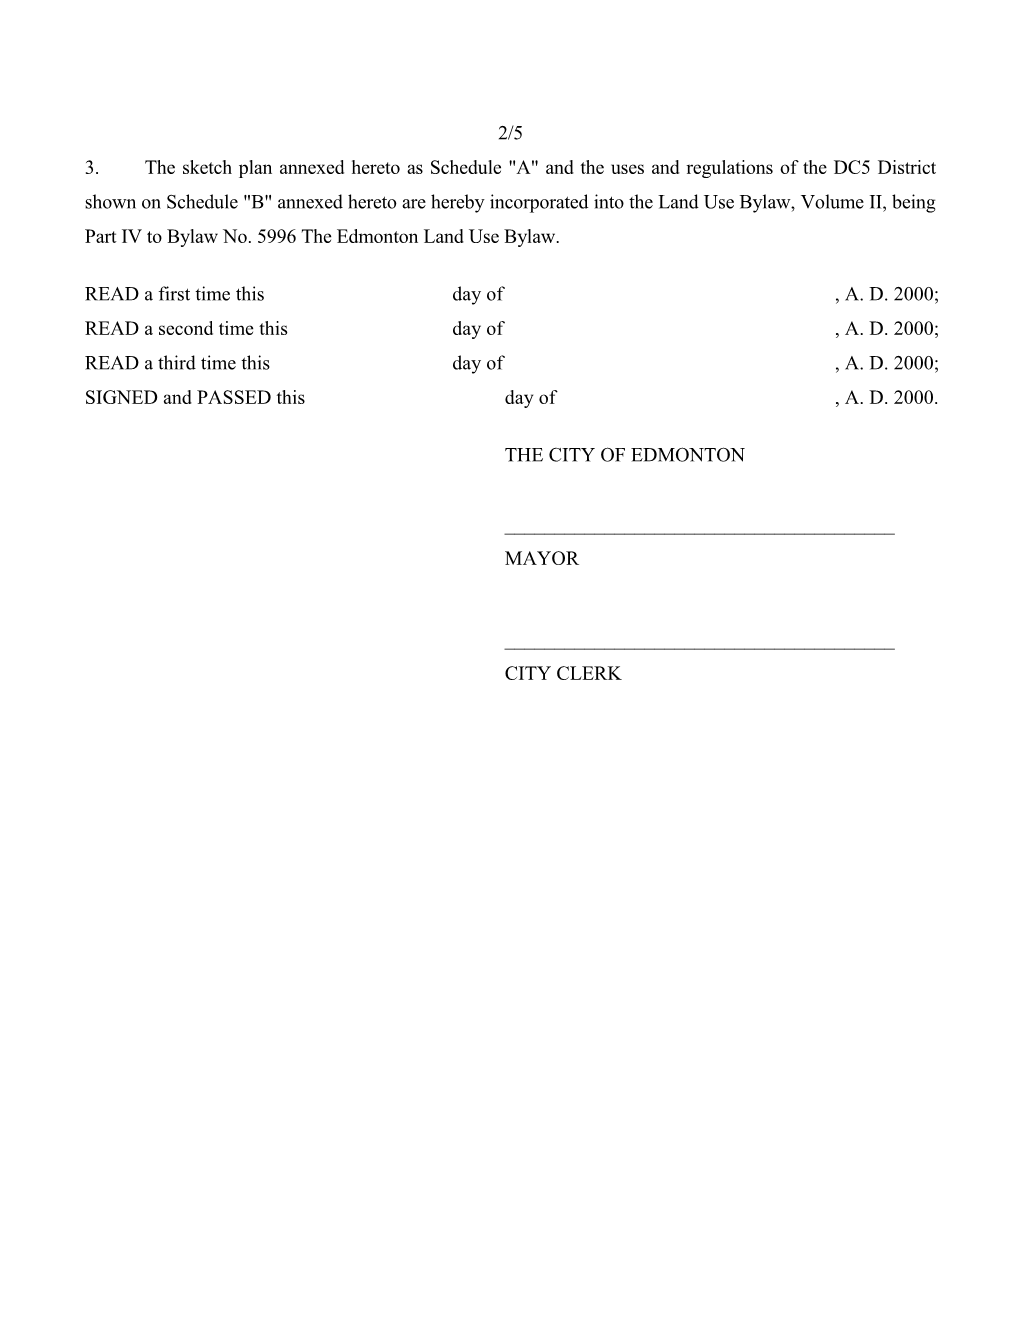 Report Attachment - Bylaw for City Council July 12, 2000 Meeting